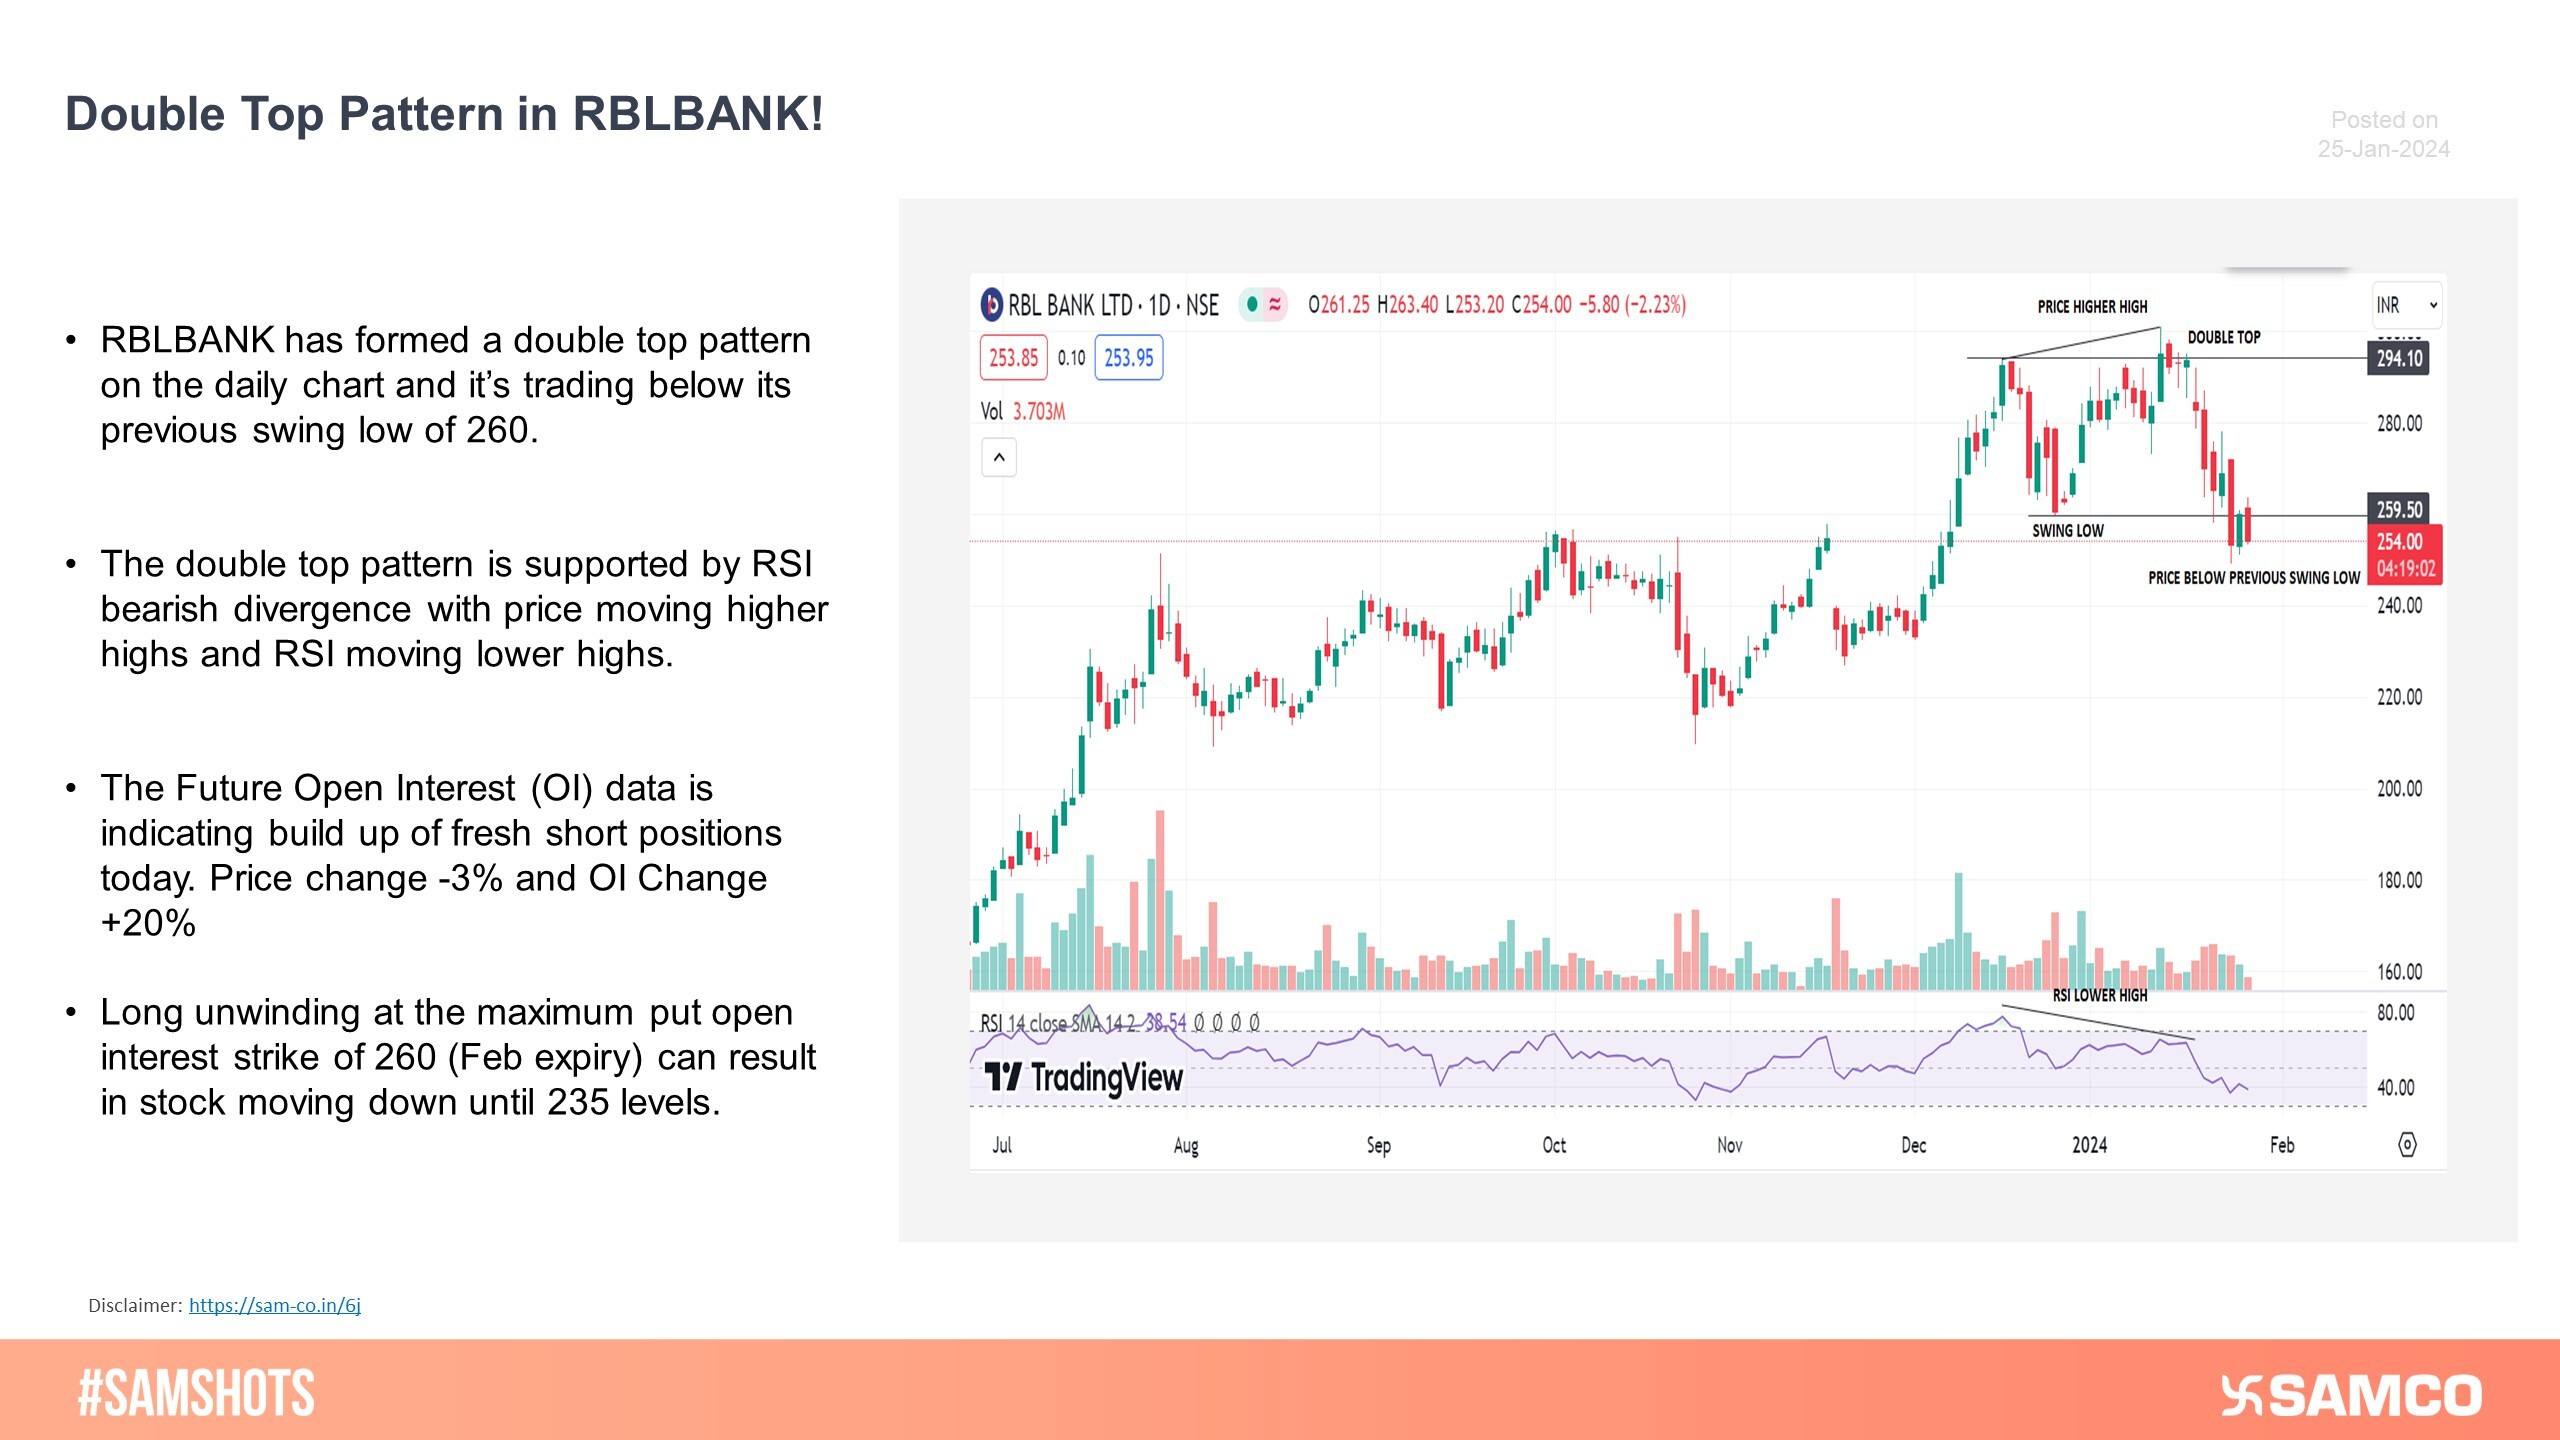 RBLBANK has formed a double top pattern on the daily chart supported by RSI bearish divergence and is trading below its previous swing low of 260 on the daily chart.